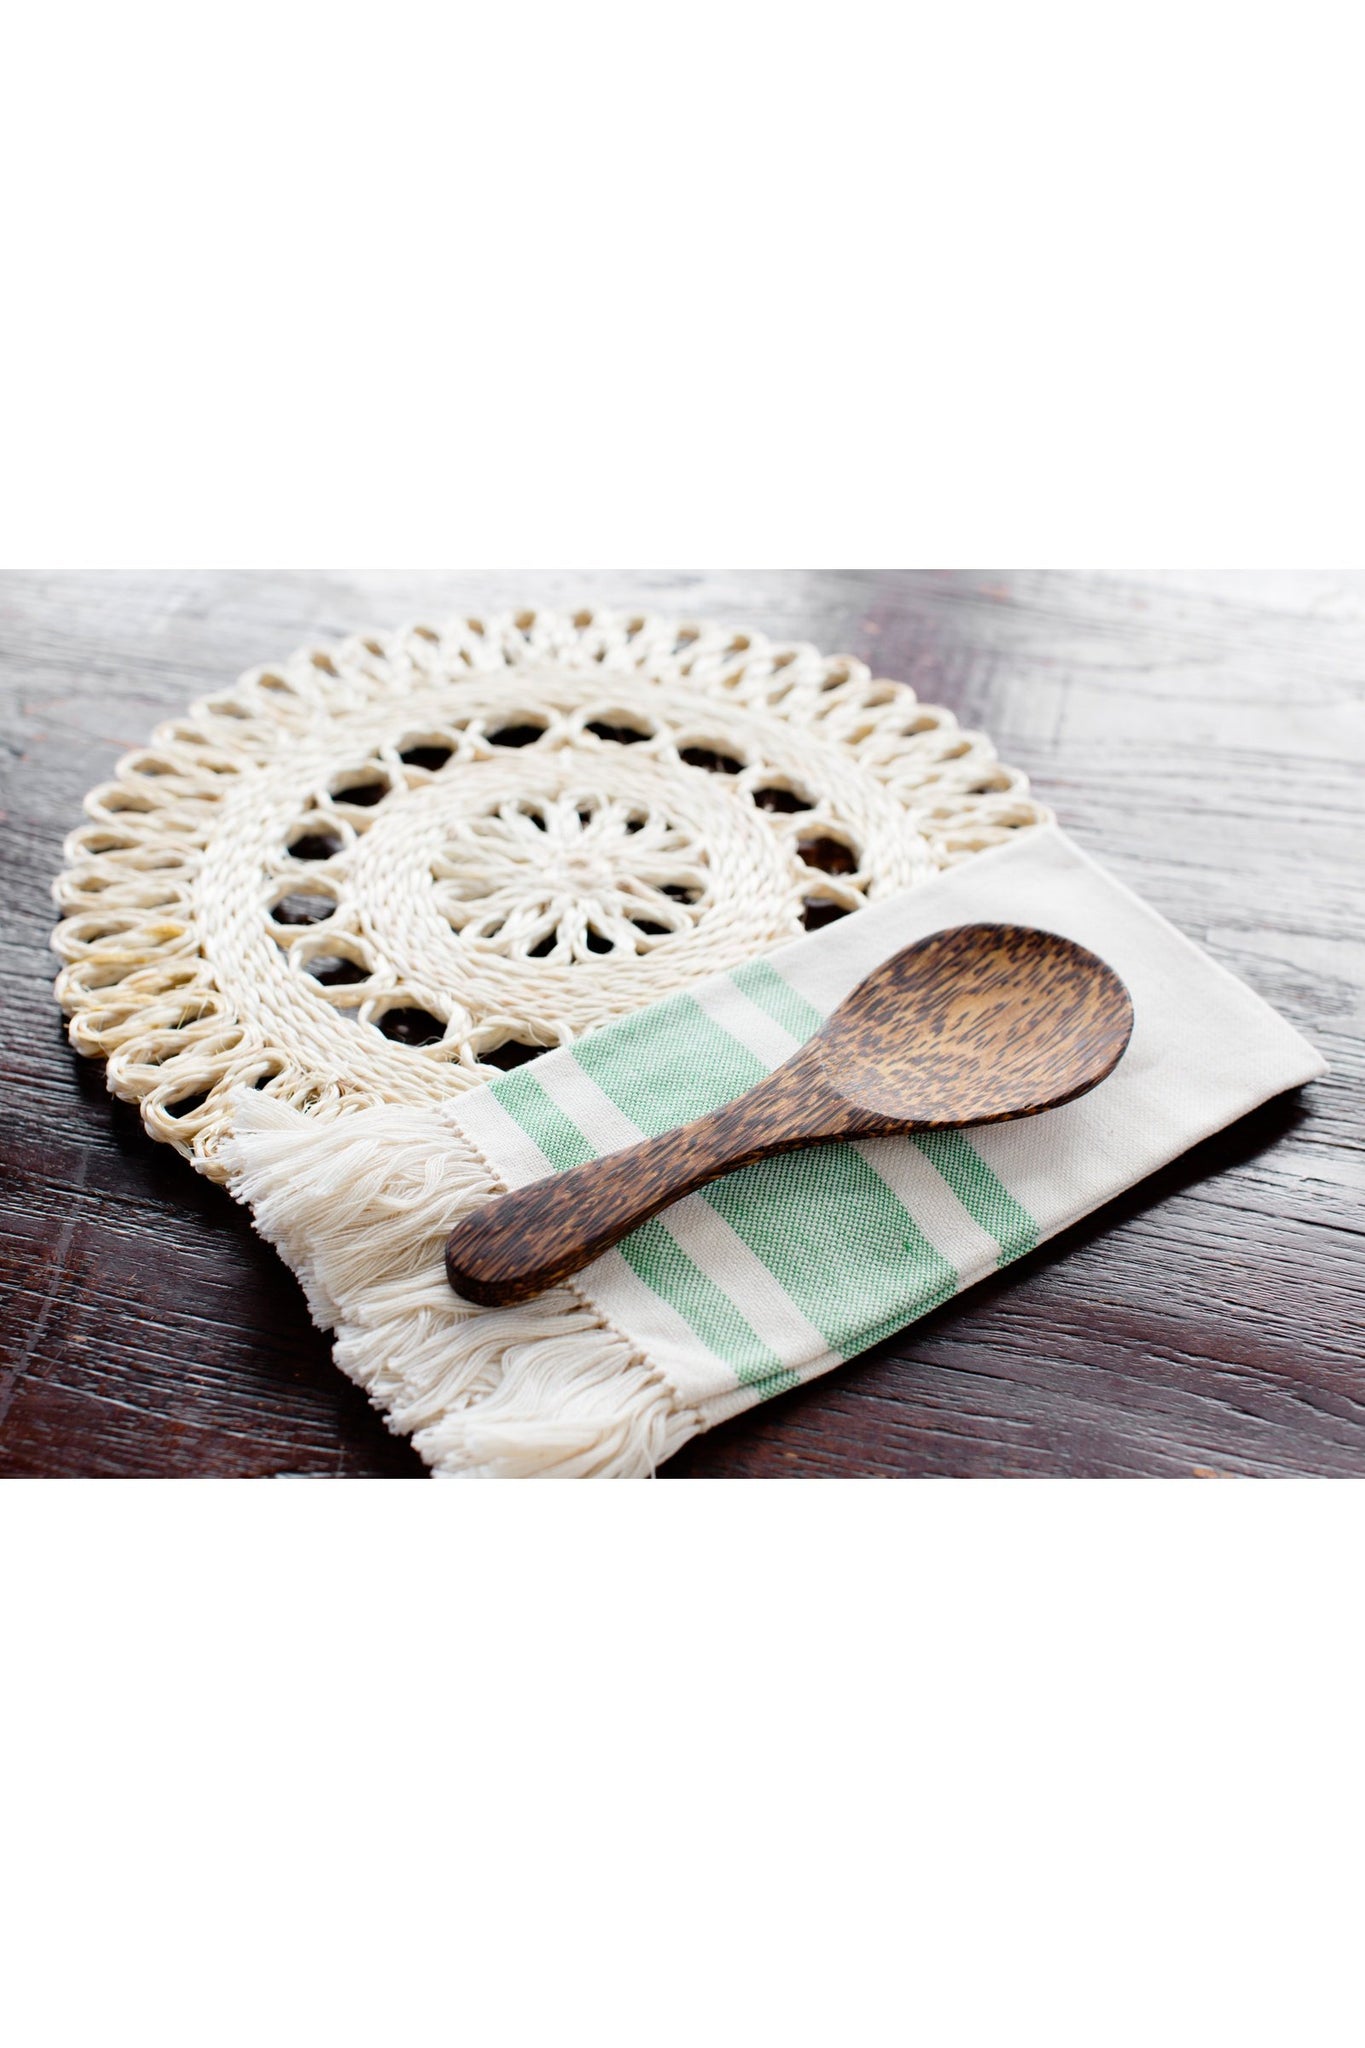 Handwoven Seagrass Placemat Trivet | All Natural